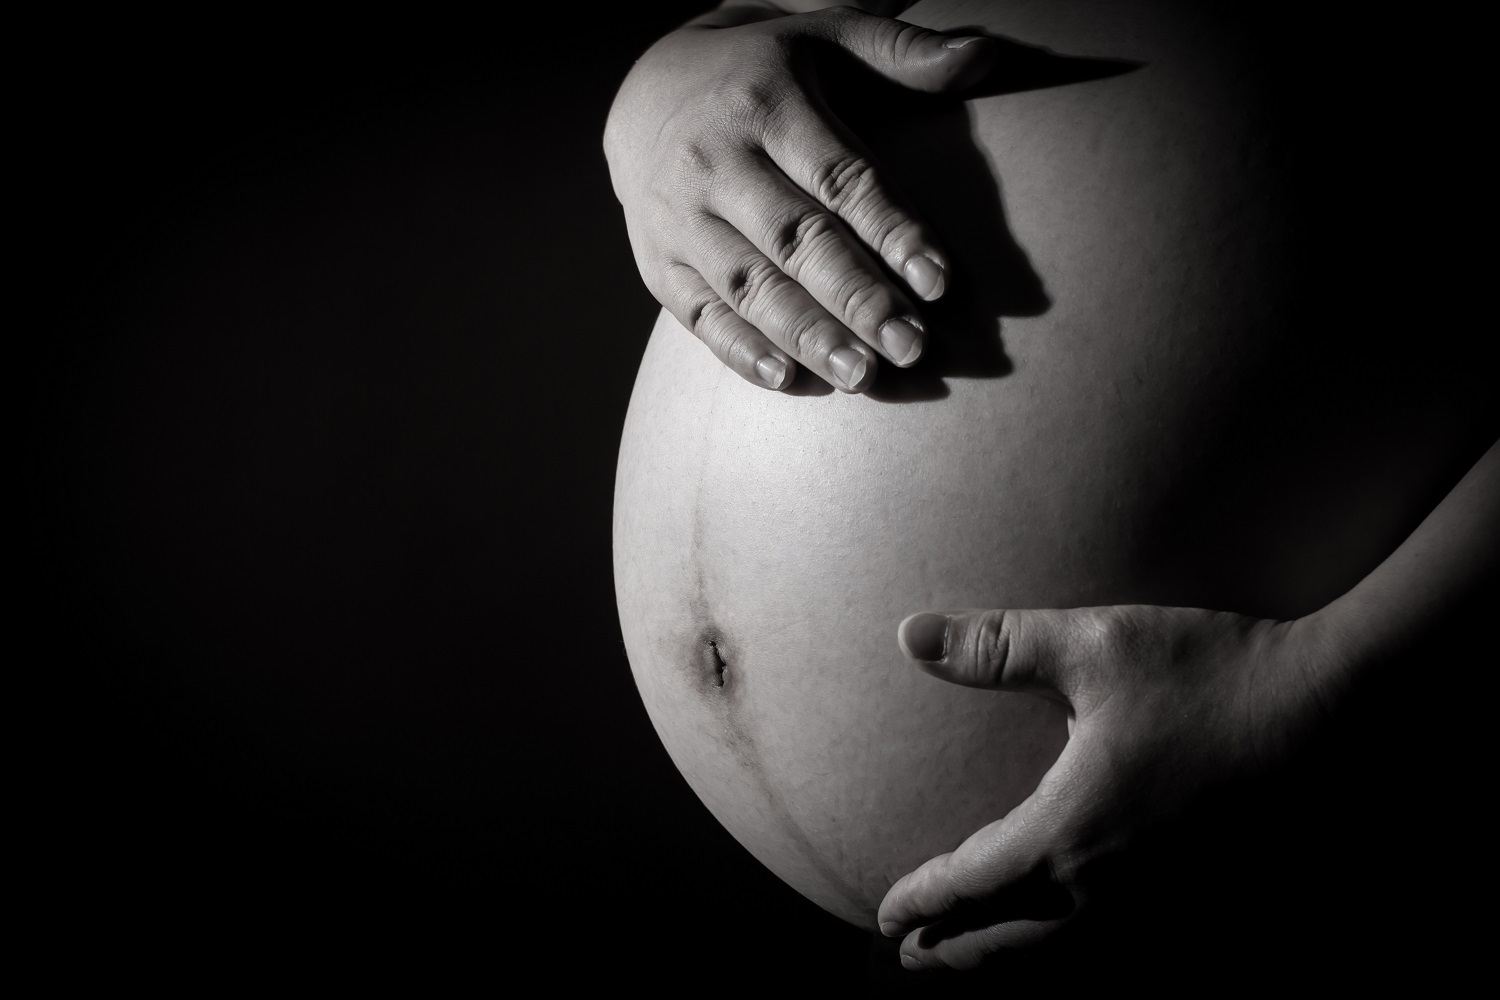 Debate over U.S. maternal mortality rates: pregnant belly with hands caressing against black background